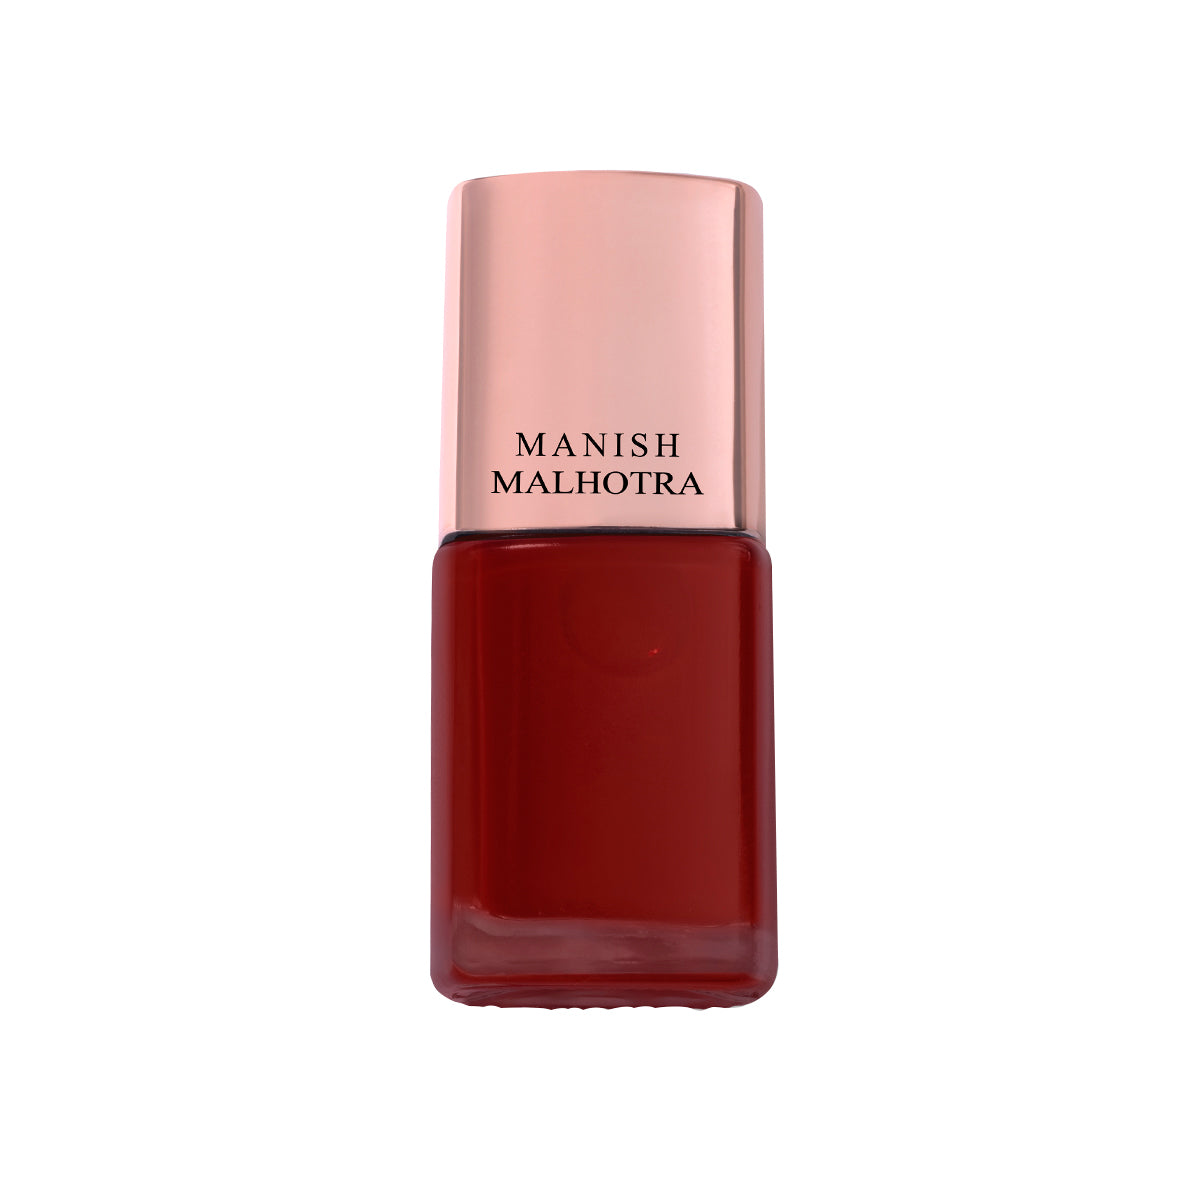 Manish Malhotra Beauty By MyGlamm Gel Finish Nail Lacquer-Mysterious Muse-10ml